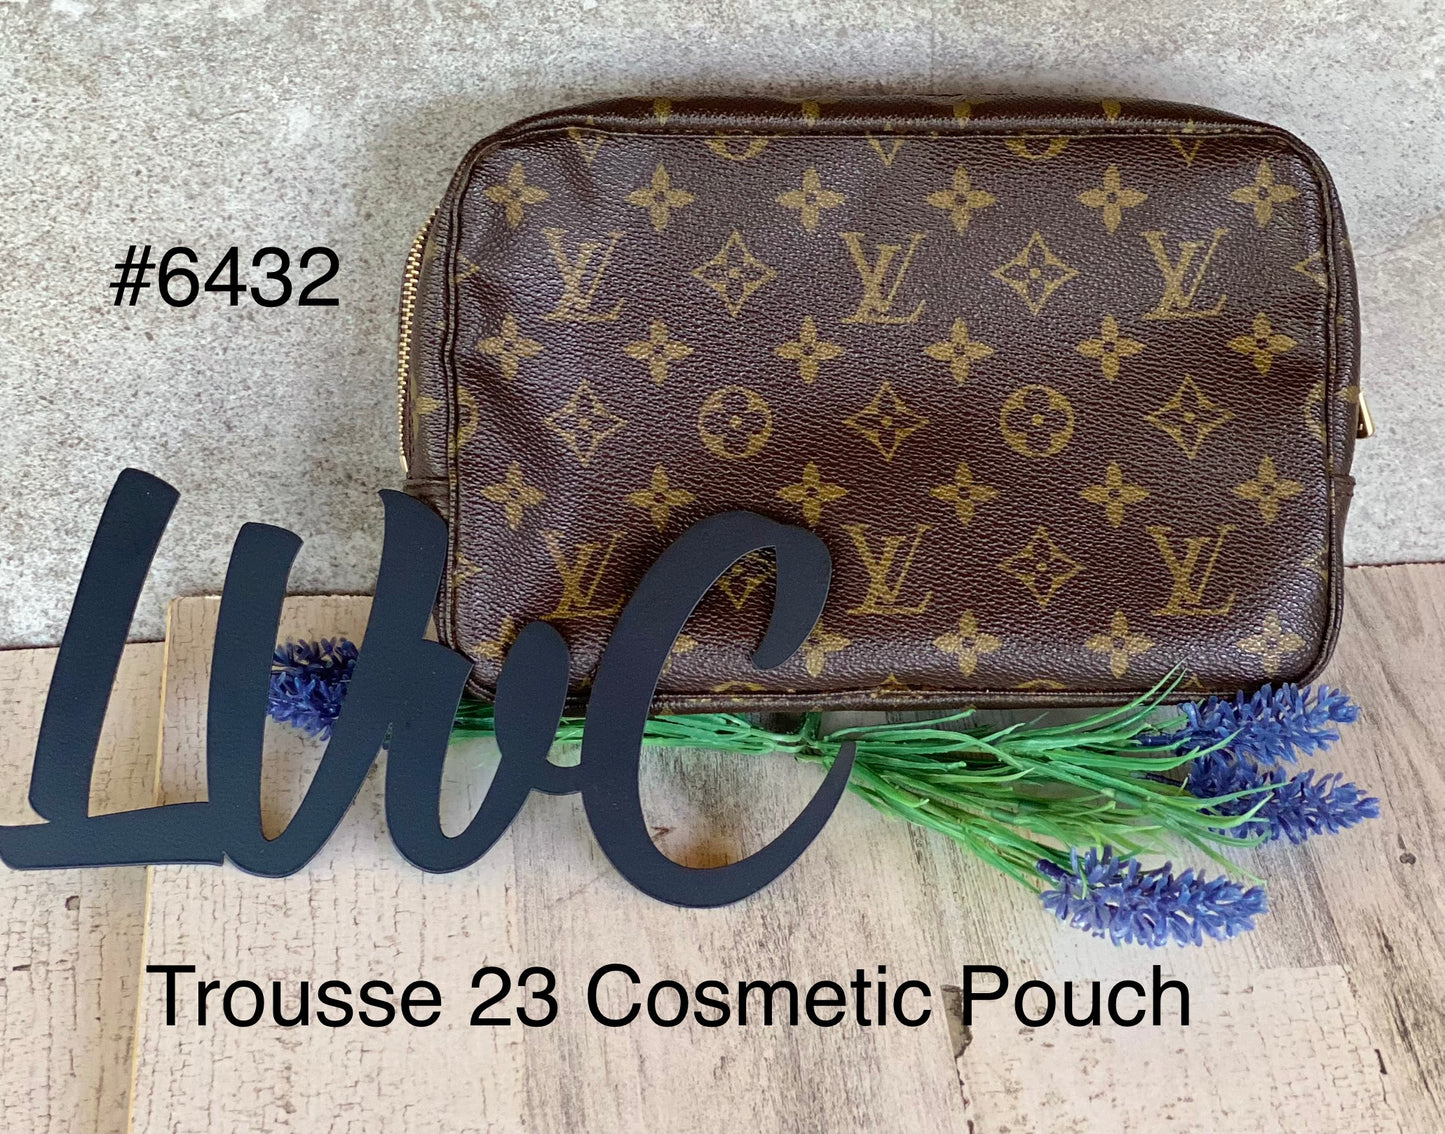 Authentic Trousse 23 Cosmetic Pouch